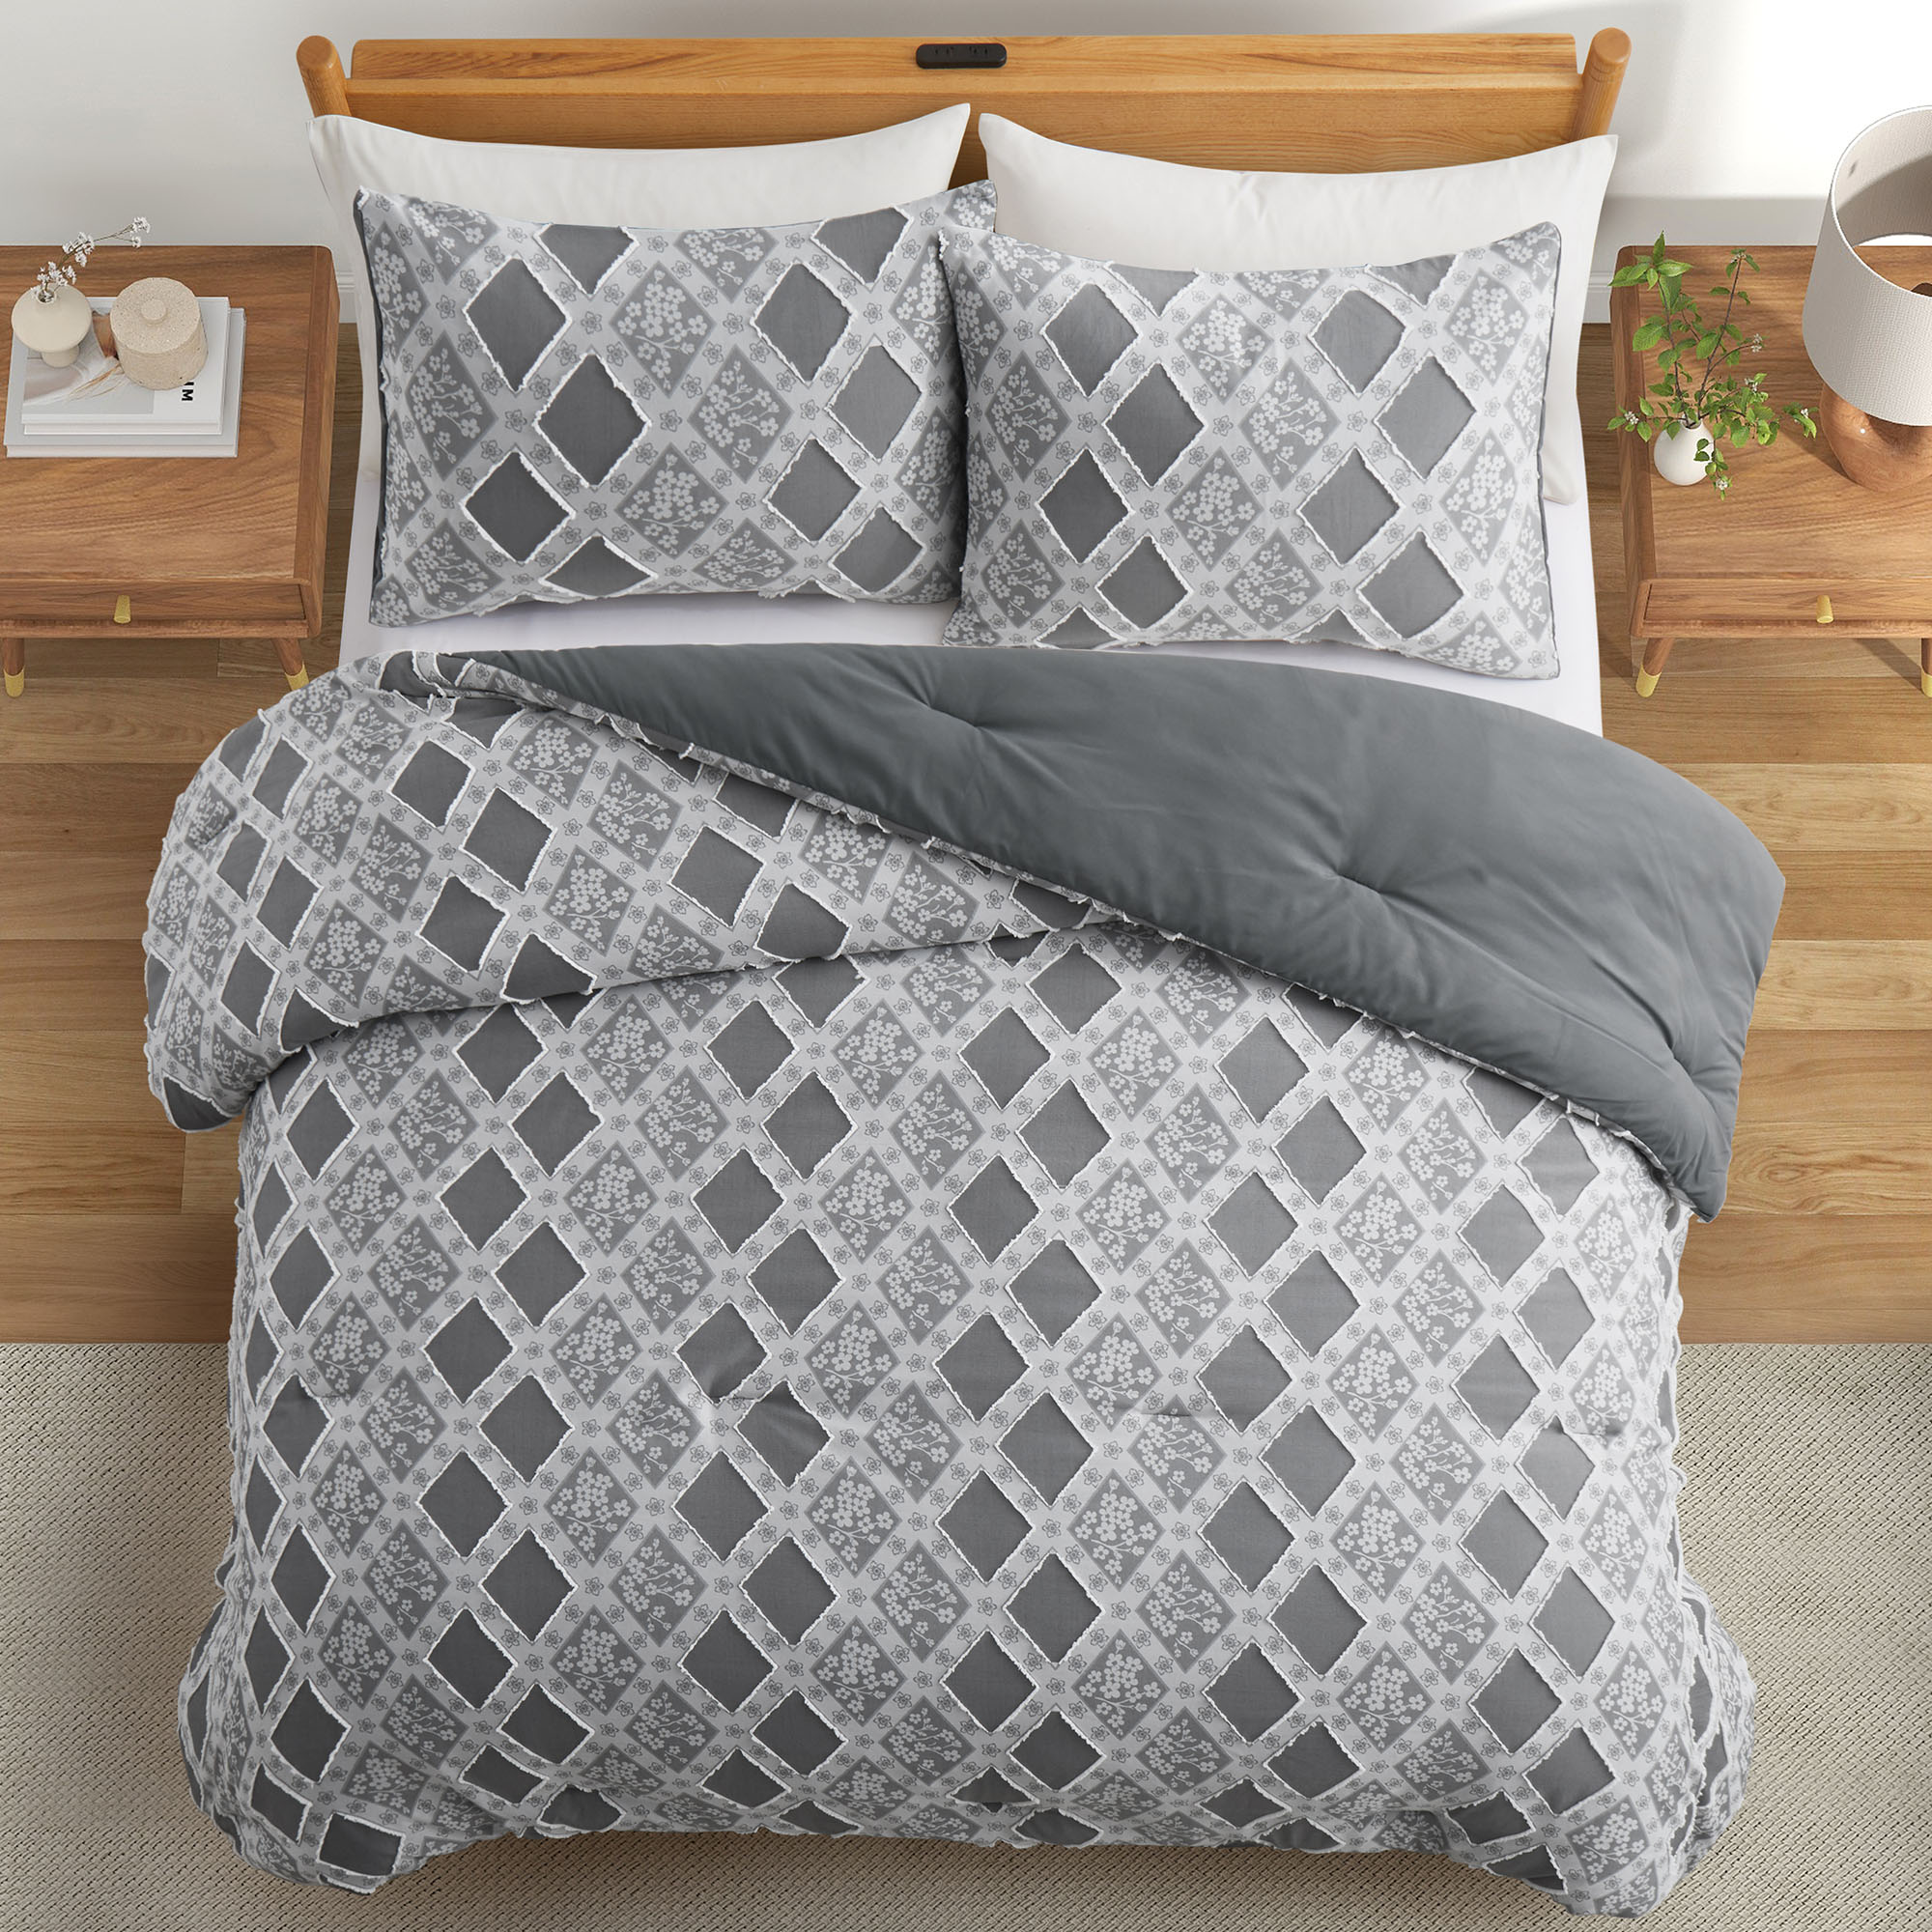 Peace Nest All Season Warmth Clipped Microfiber Comforter Set, Gray, King - image 1 of 6